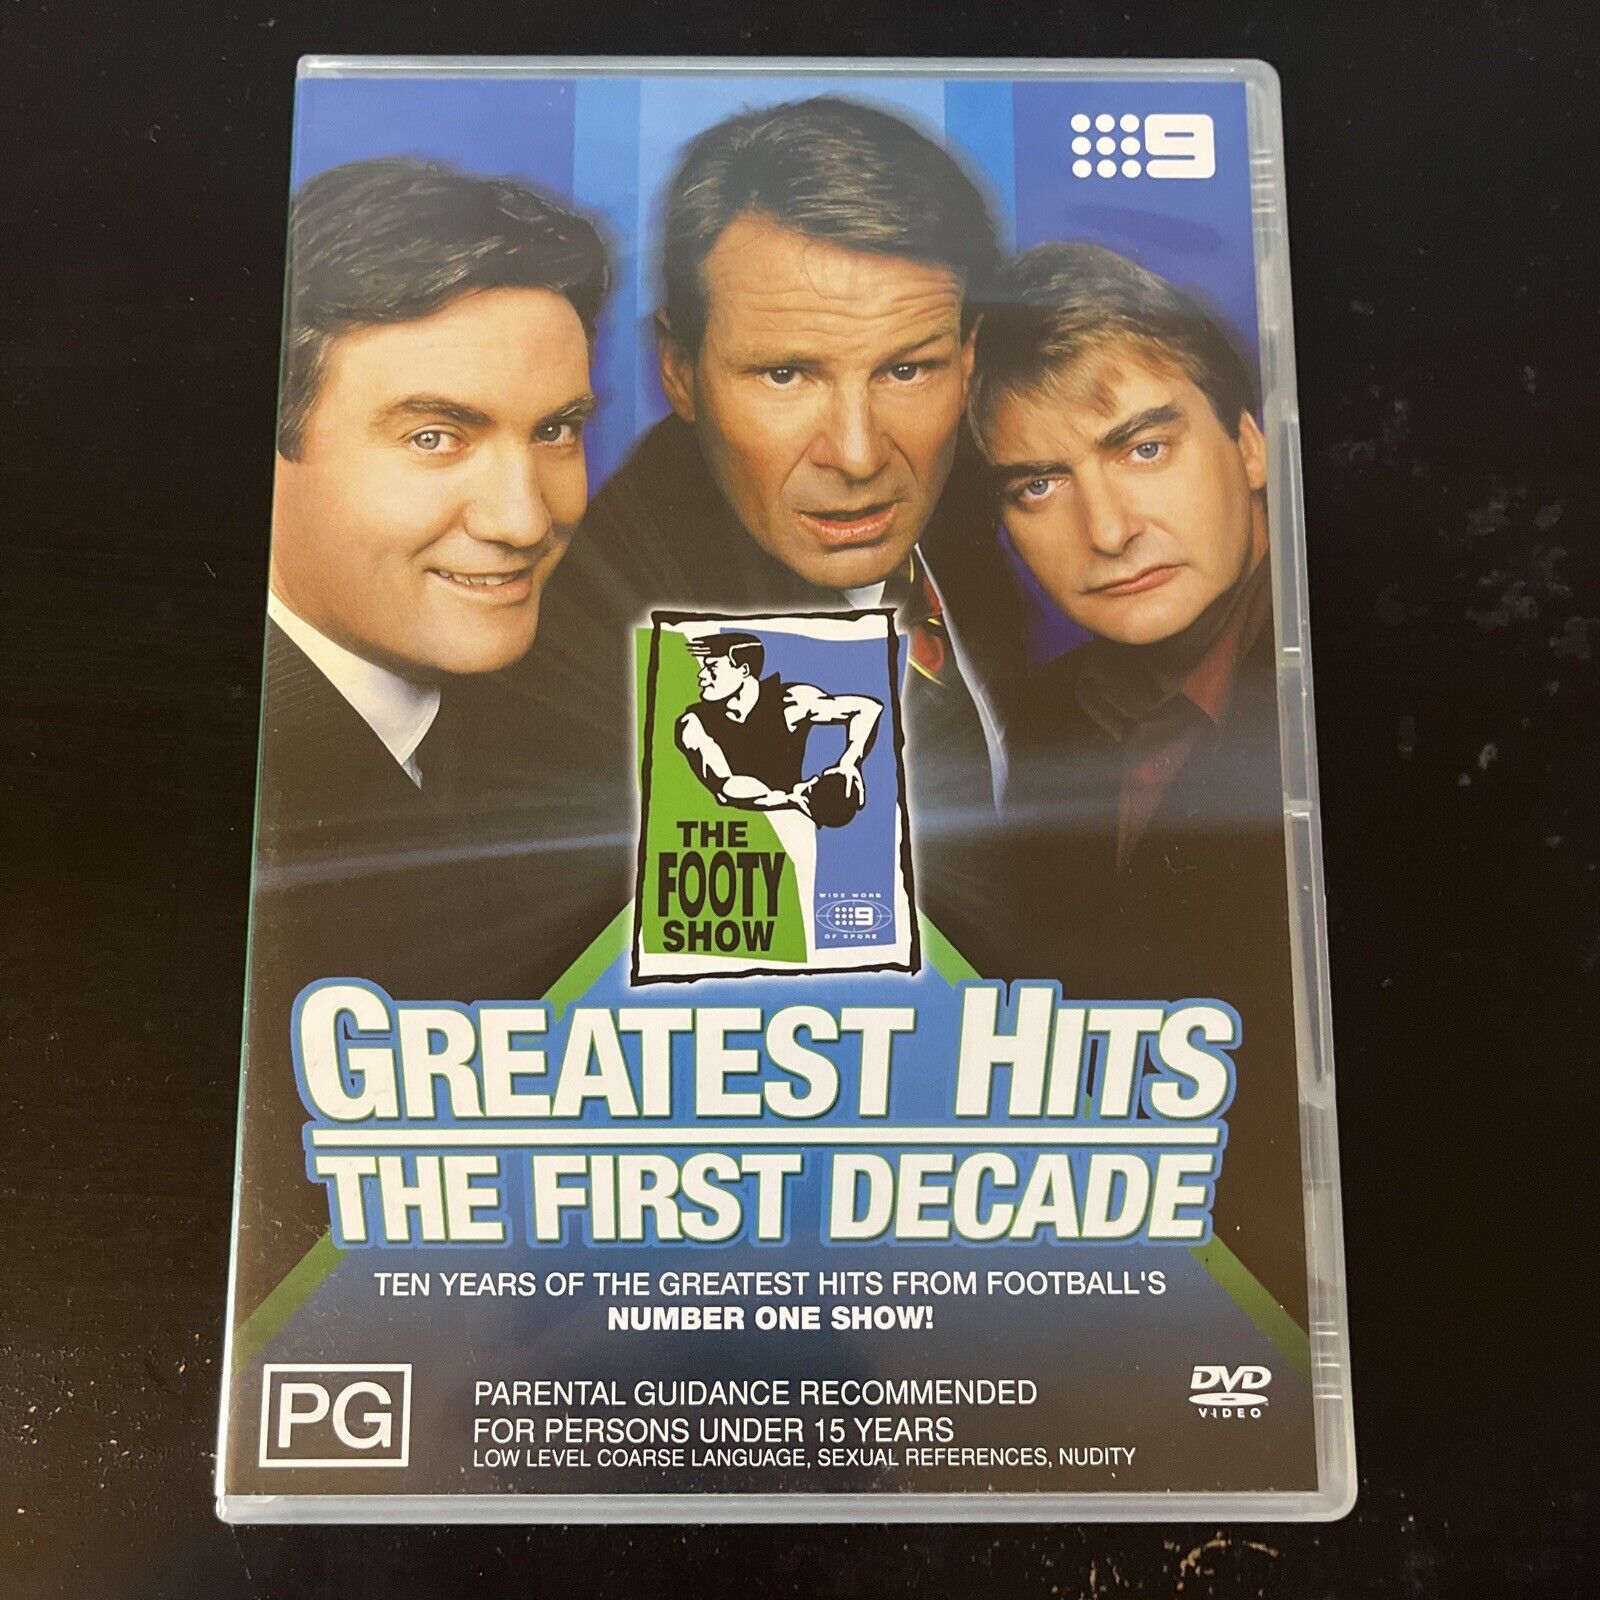 The Footy Show - Greatest Hits, The First Decade (DVD, 2004) NEW All R ...